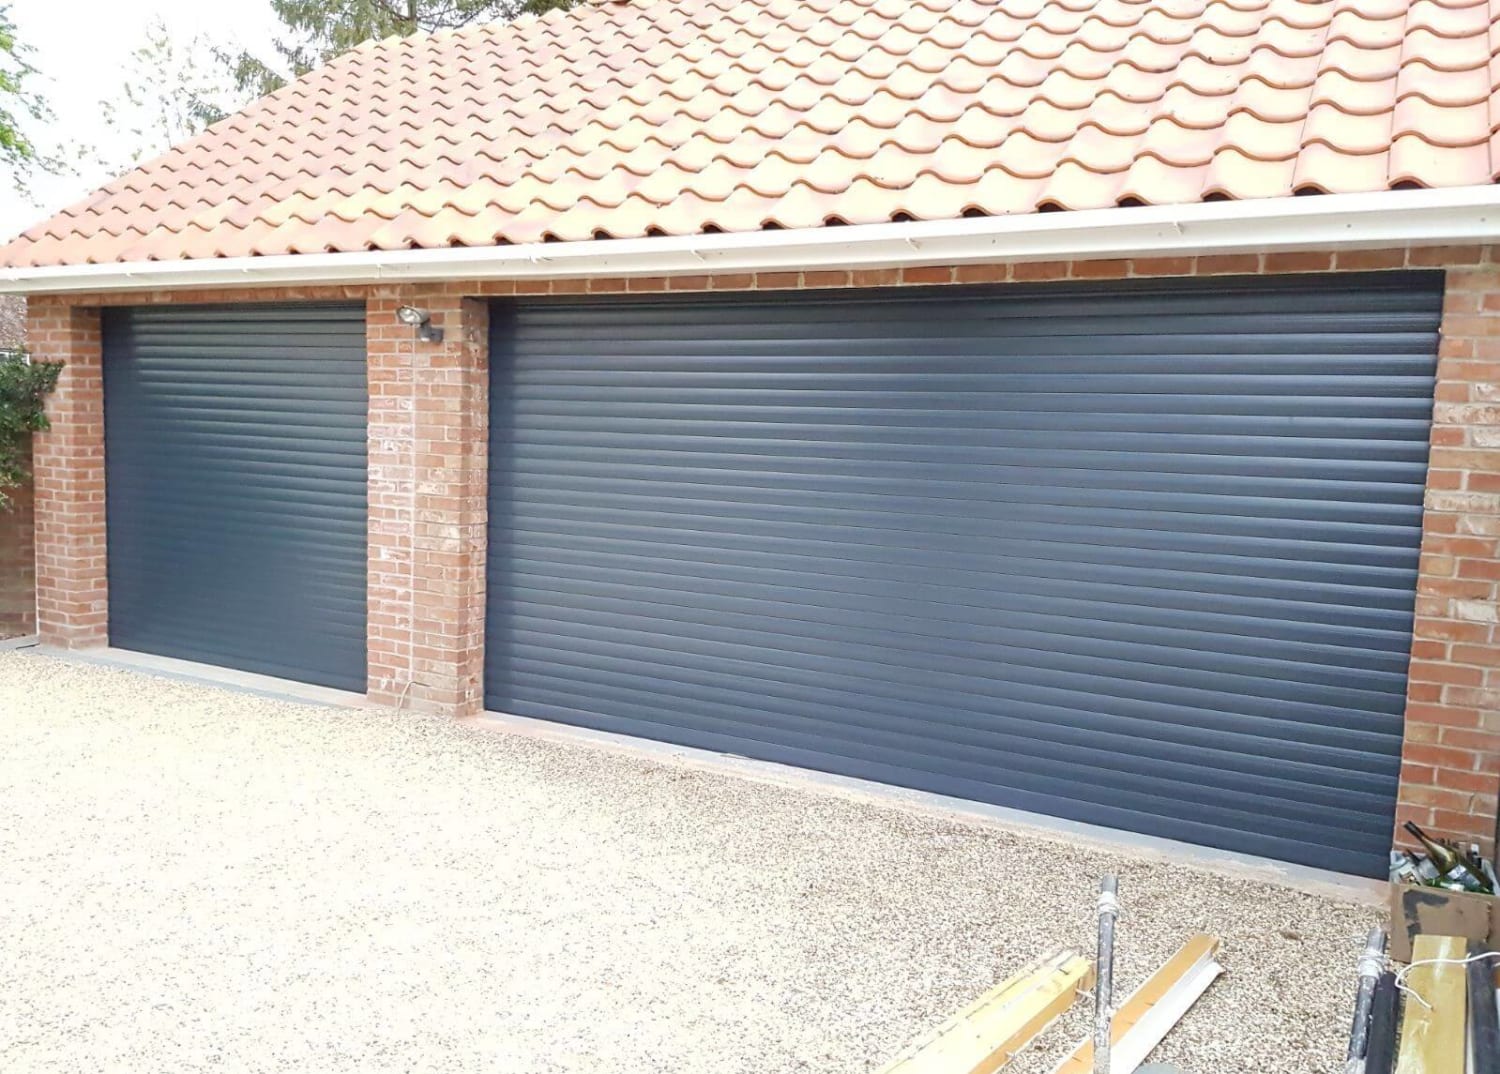 Finding the right Roller Shutter Garage Doors is a task